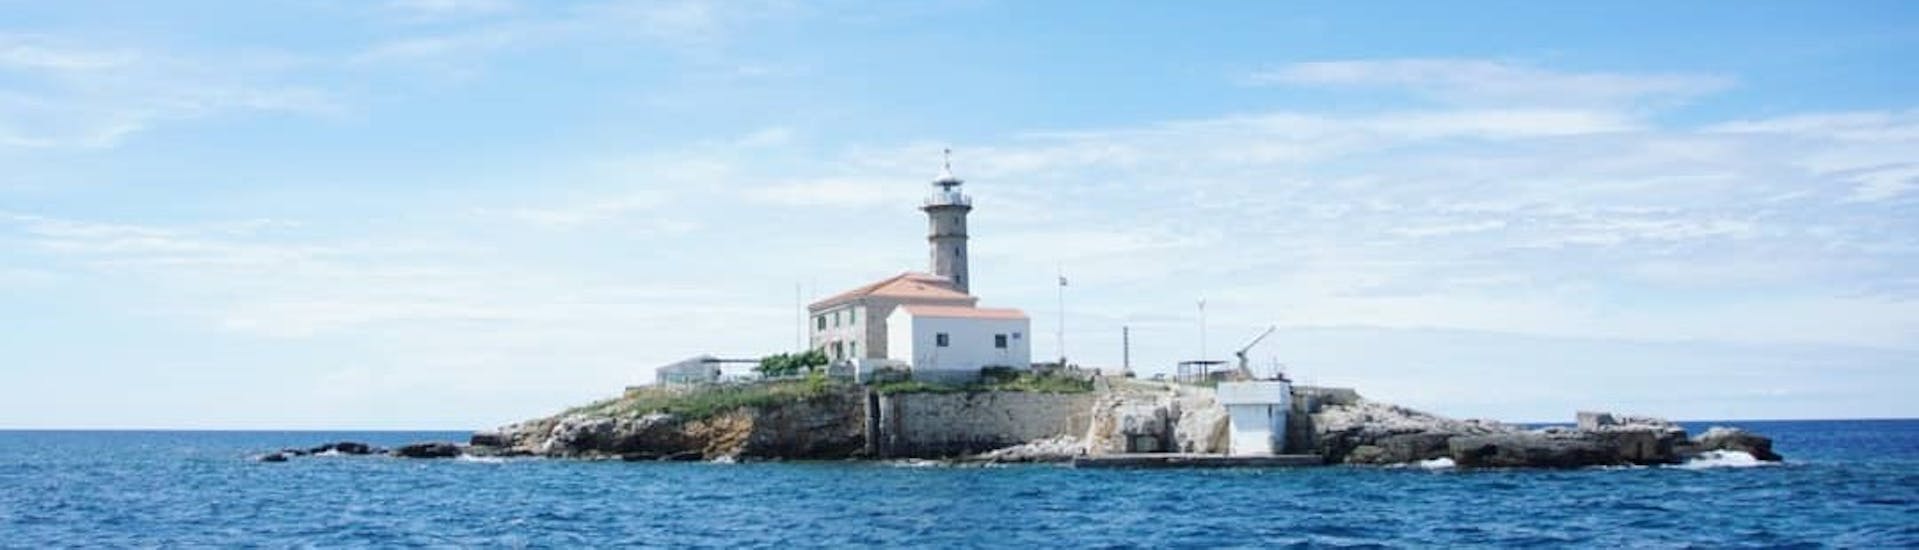 A sight seen during the Speedboat Trip to Pirate Cave & Red Island with Boat Excursions Tonka Rovinj.